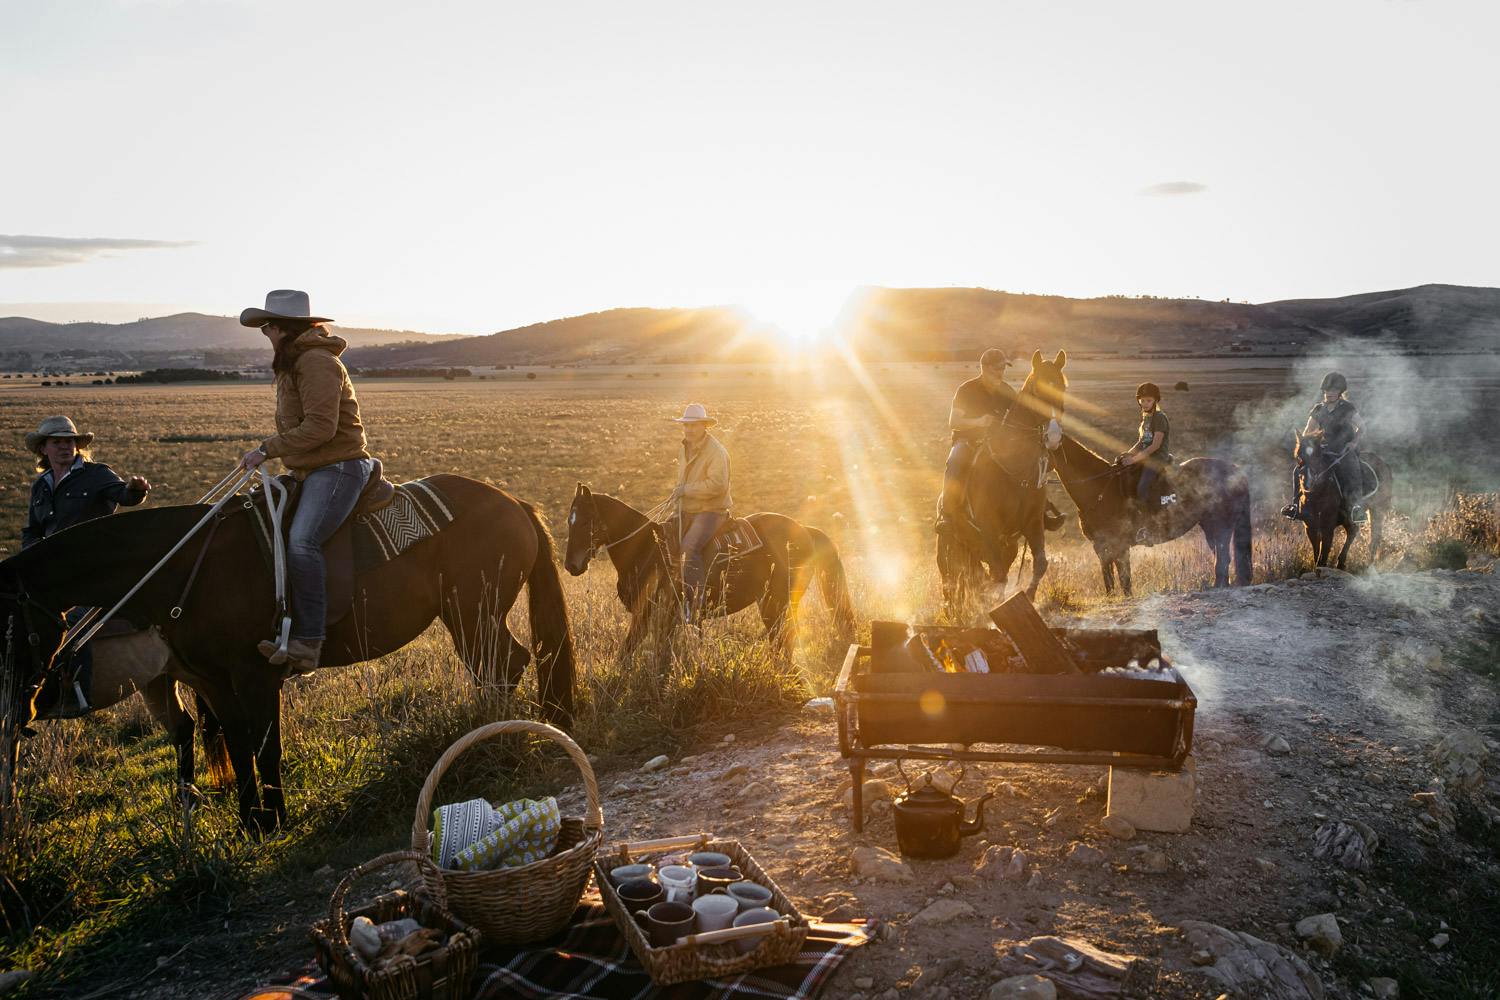 Riders on horseback in the Australian outback with a fire lit and picnic accessories in the foreground and the sun setting over the hills on the horizon